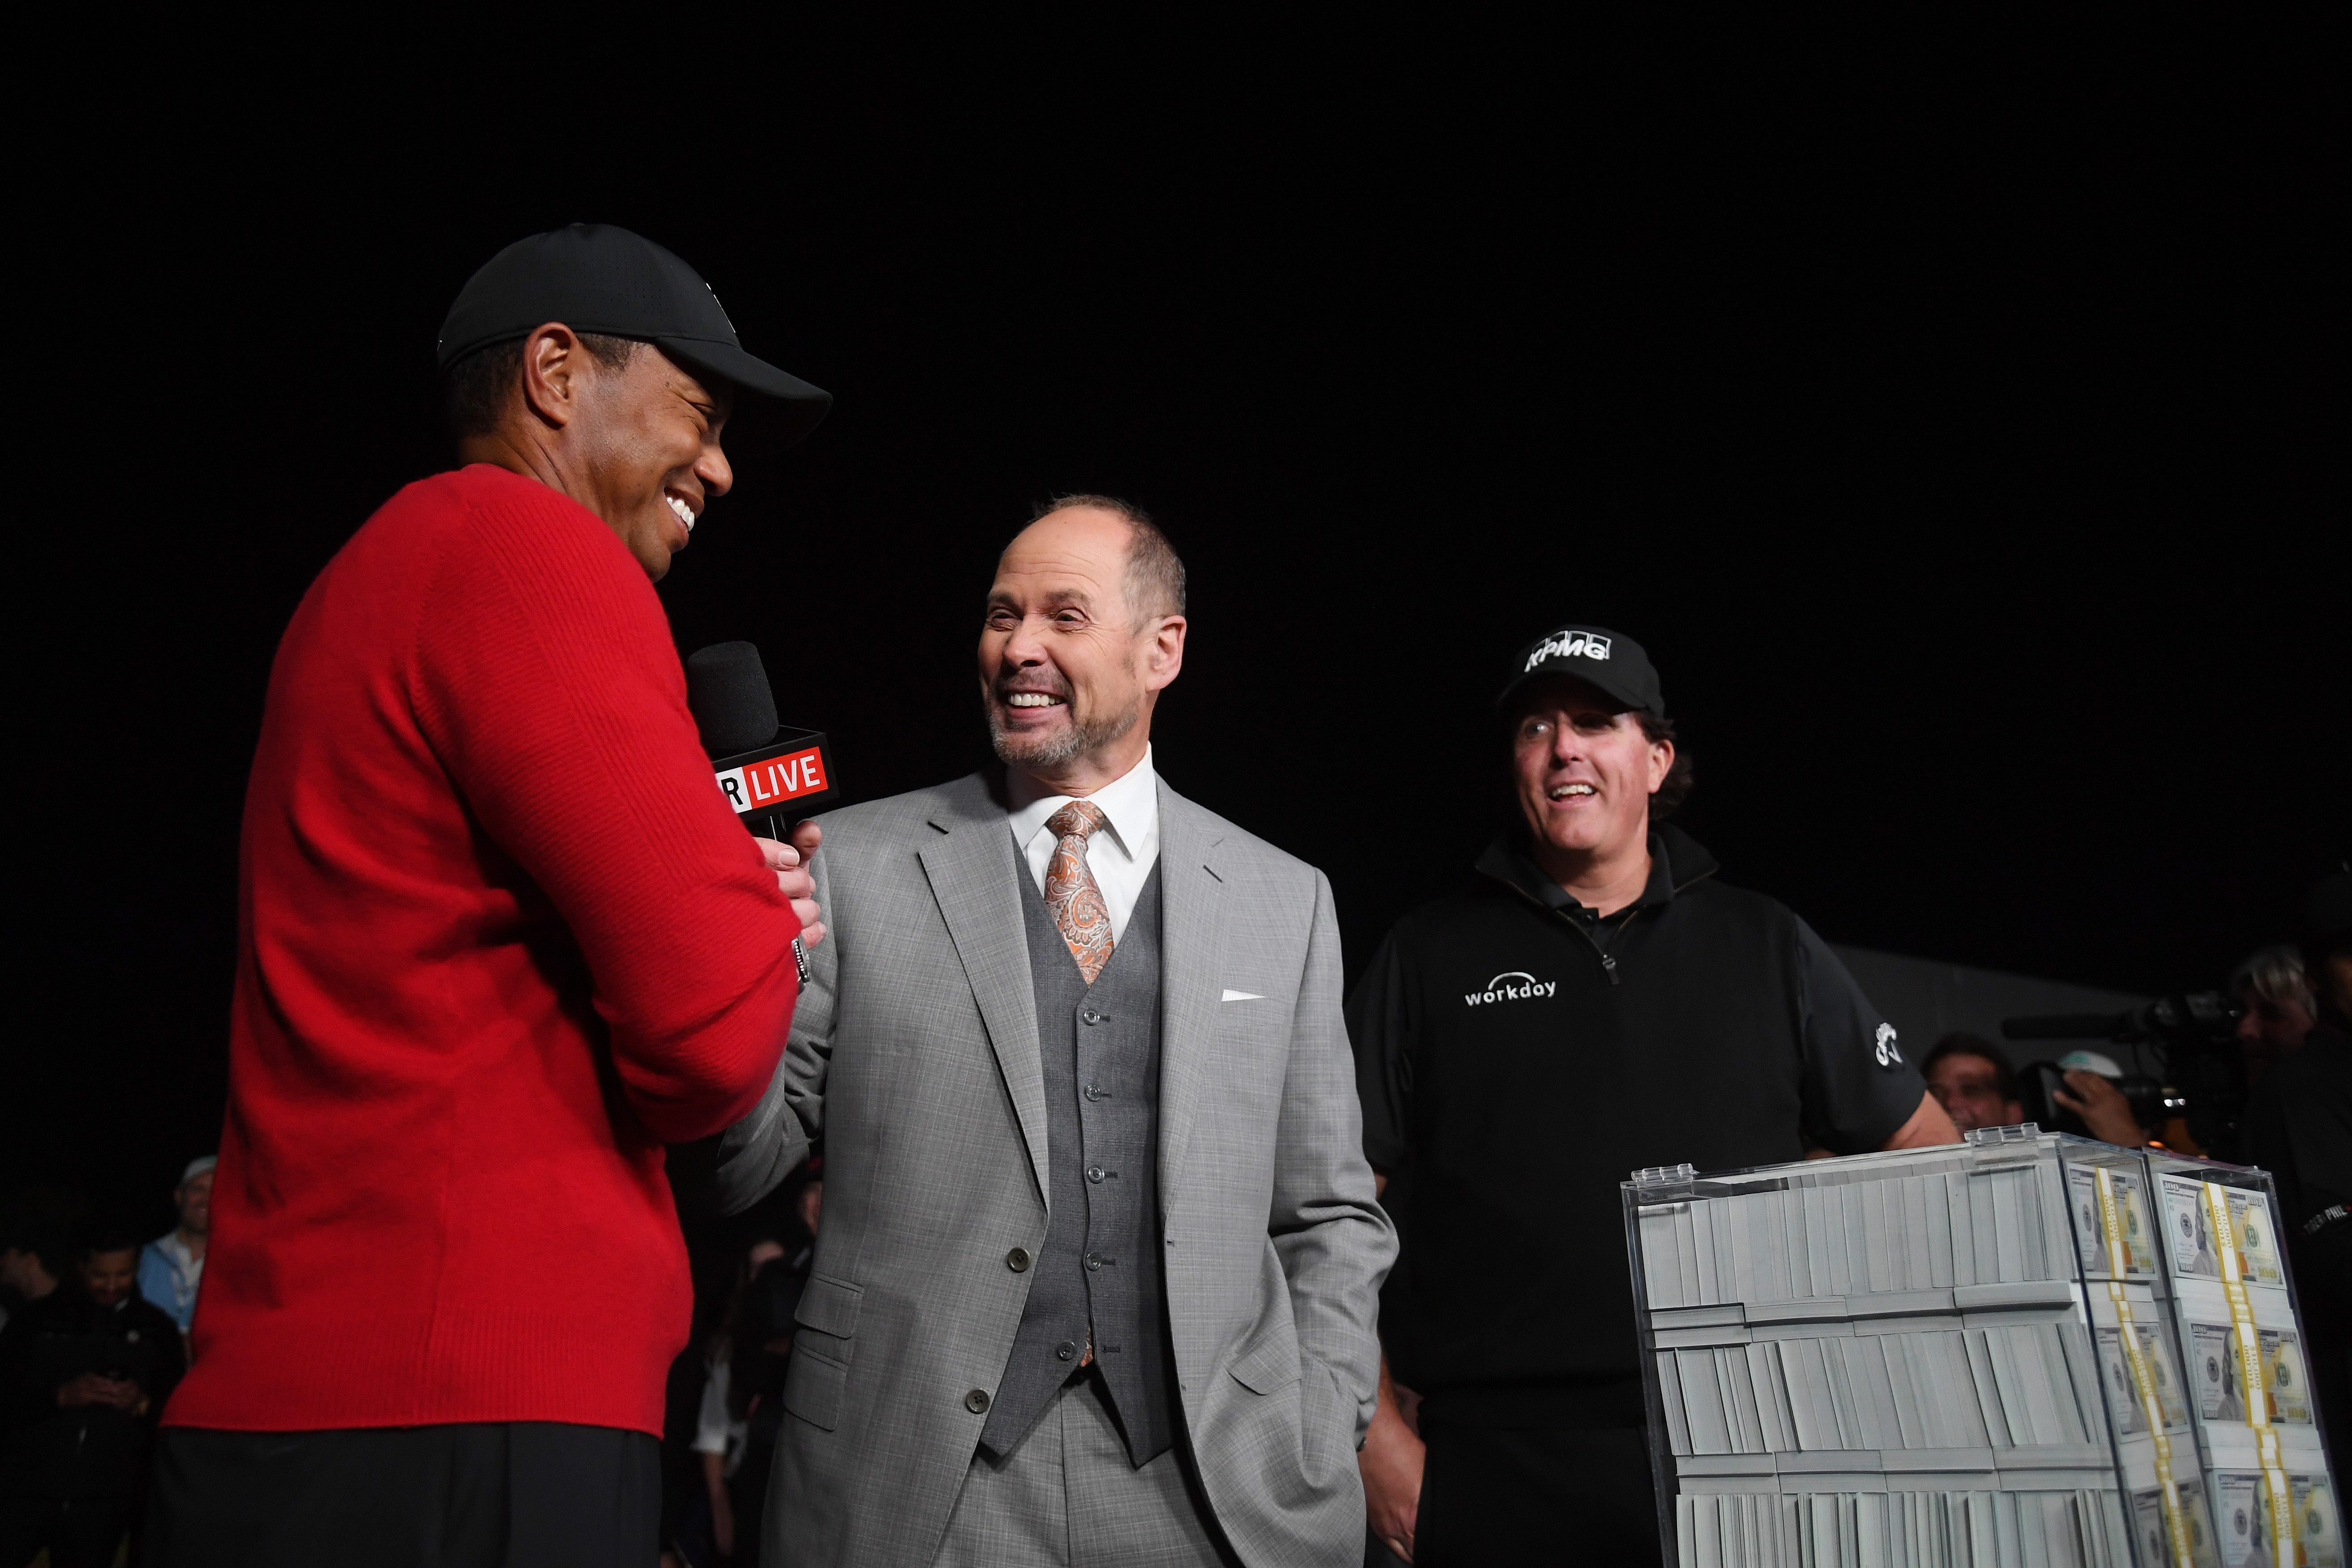 Charles Barkley delivers big news to Ernie Johnson during 'The Match